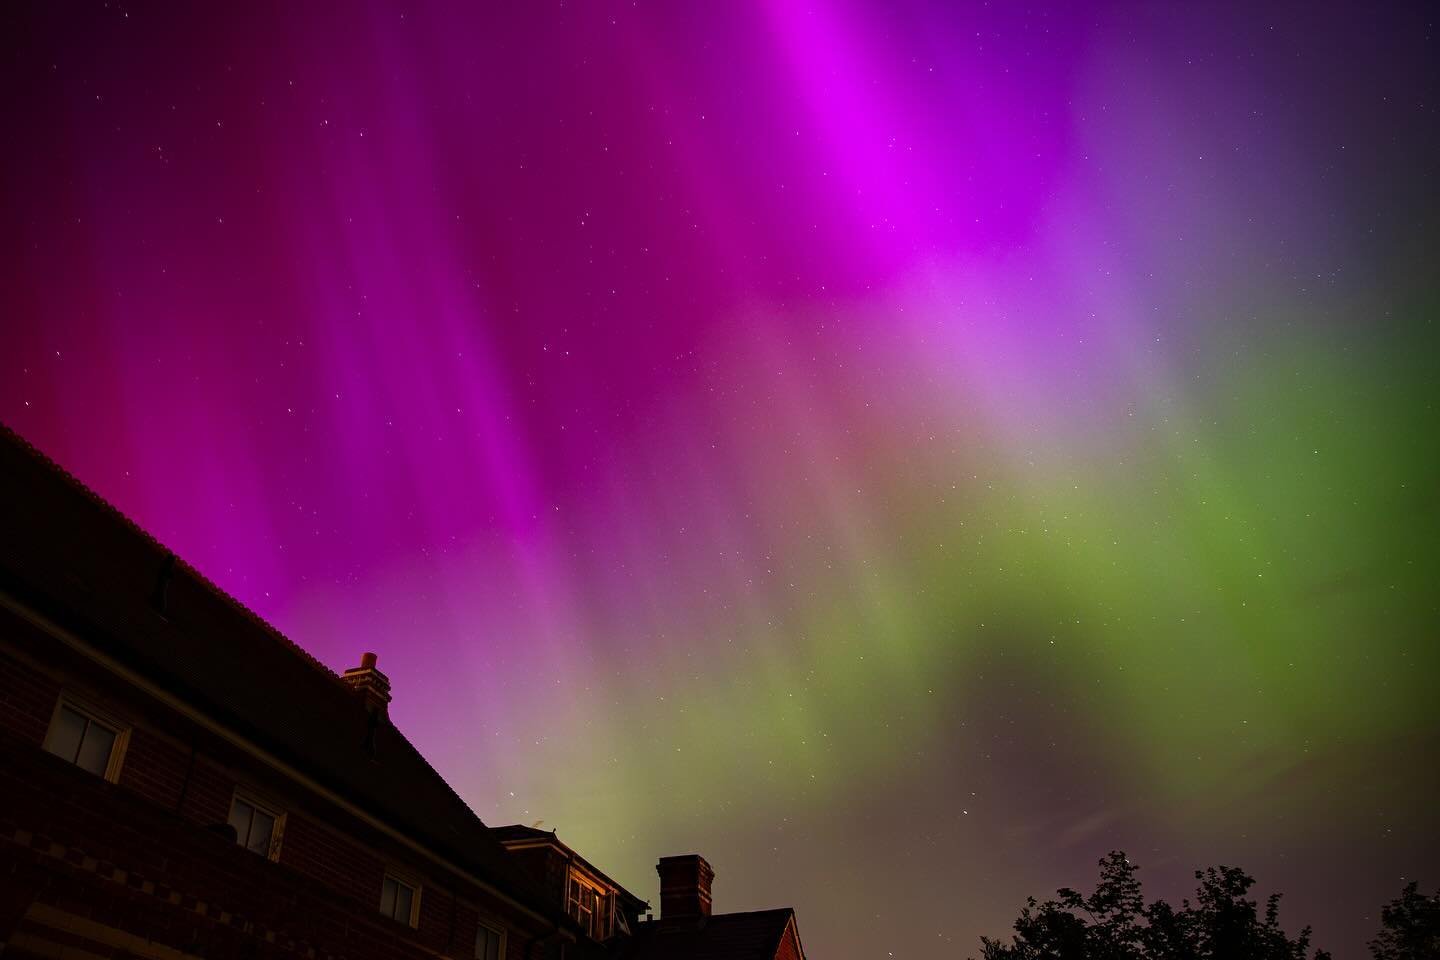 Aurora Borealis 🌌
〰️
I definitely don&rsquo;t consider myself an Astro photographer and have never really even tried it before, but couldn&rsquo;t resist taking my camera out into the garden this evening! Spent a few minutes dodging bugs in the pitc